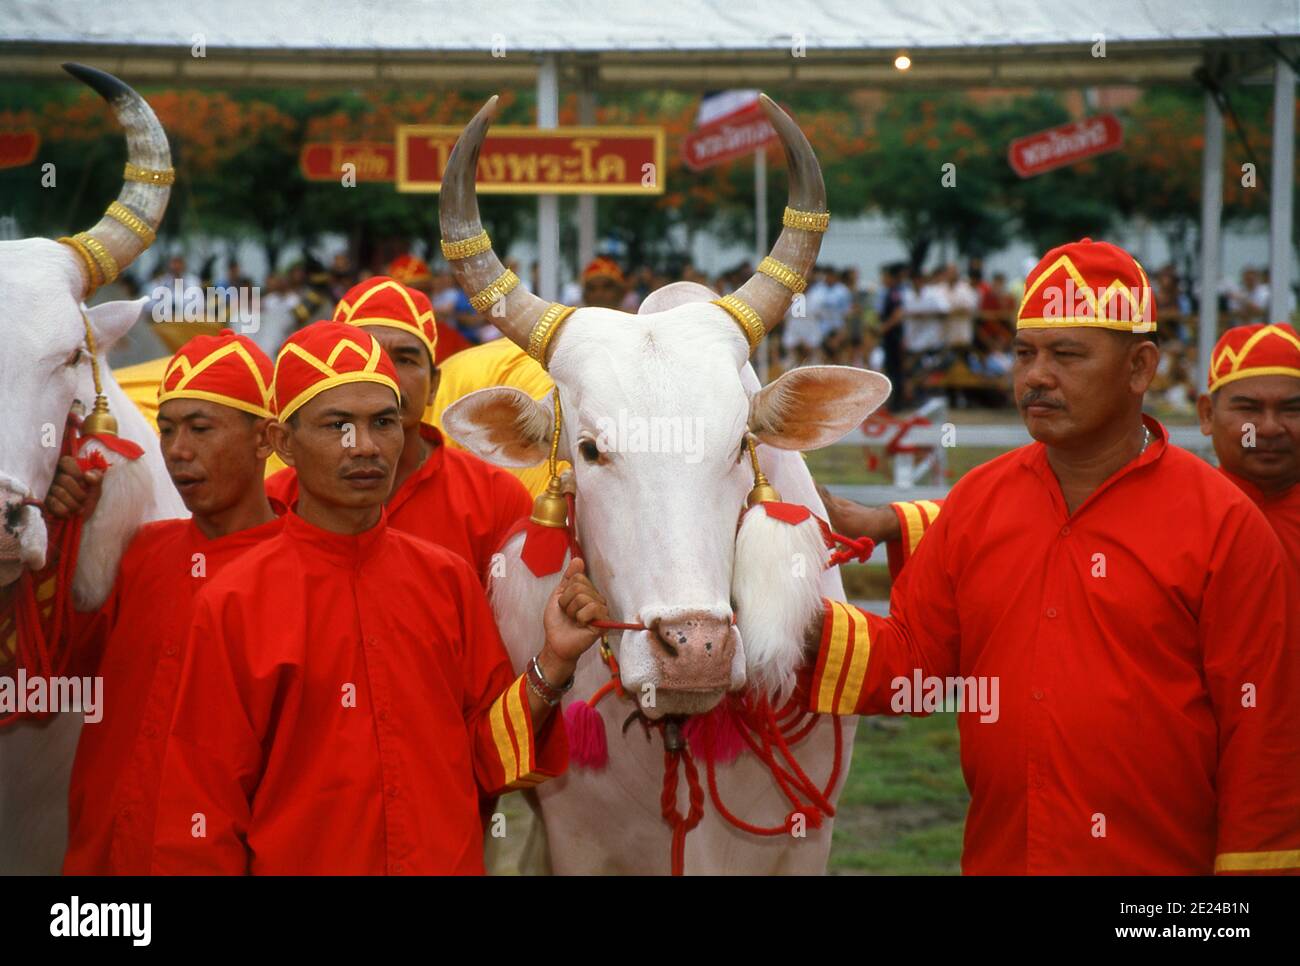 The Royal Ploughing Ceremony is an ancient Brahman ritual held each year in Bangkok at Sanam Luang in front of the Grand Palace. The event is performed to gain an auspicious start to the rice growing season. Sacred white oxen plough the Sanam Luang field, which is then sown with seeds blessed by the king. Farmers then collect the seeds to replant in their own fields. This ceremony is also performed in Cambodia and Sri Lanka. Stock Photo